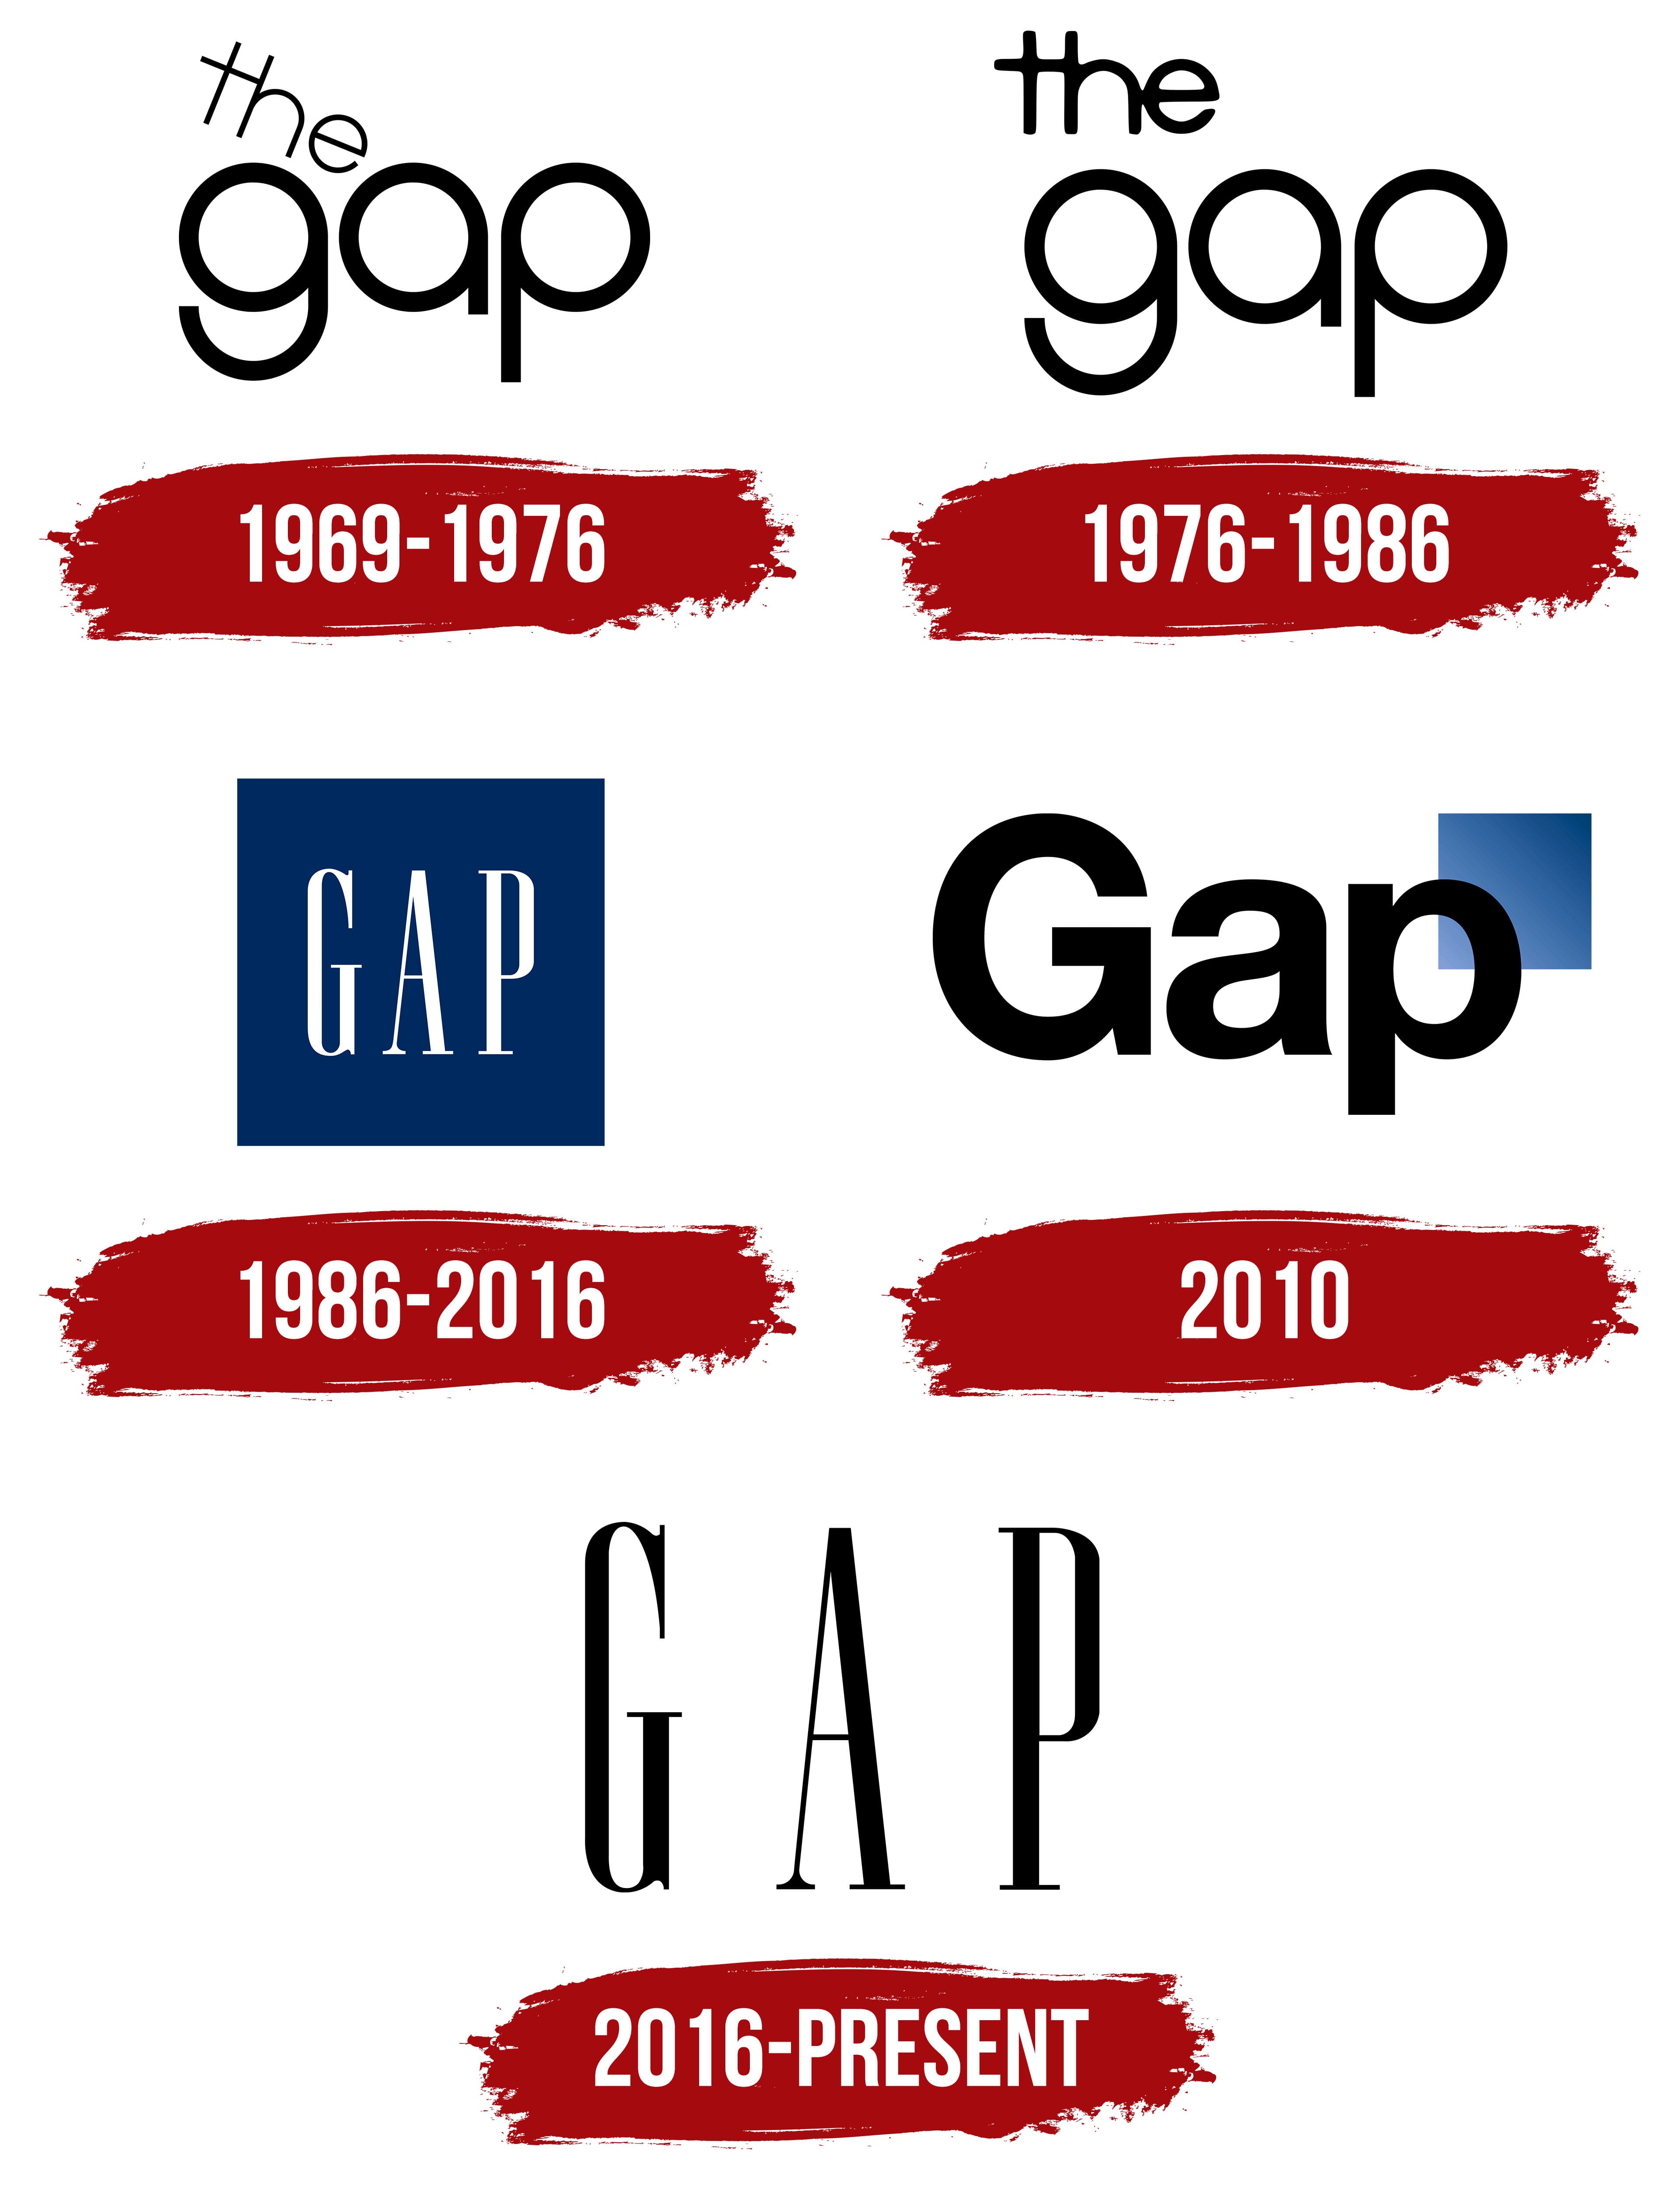 A side-by-side comparison of fashion brand Gap's logos.